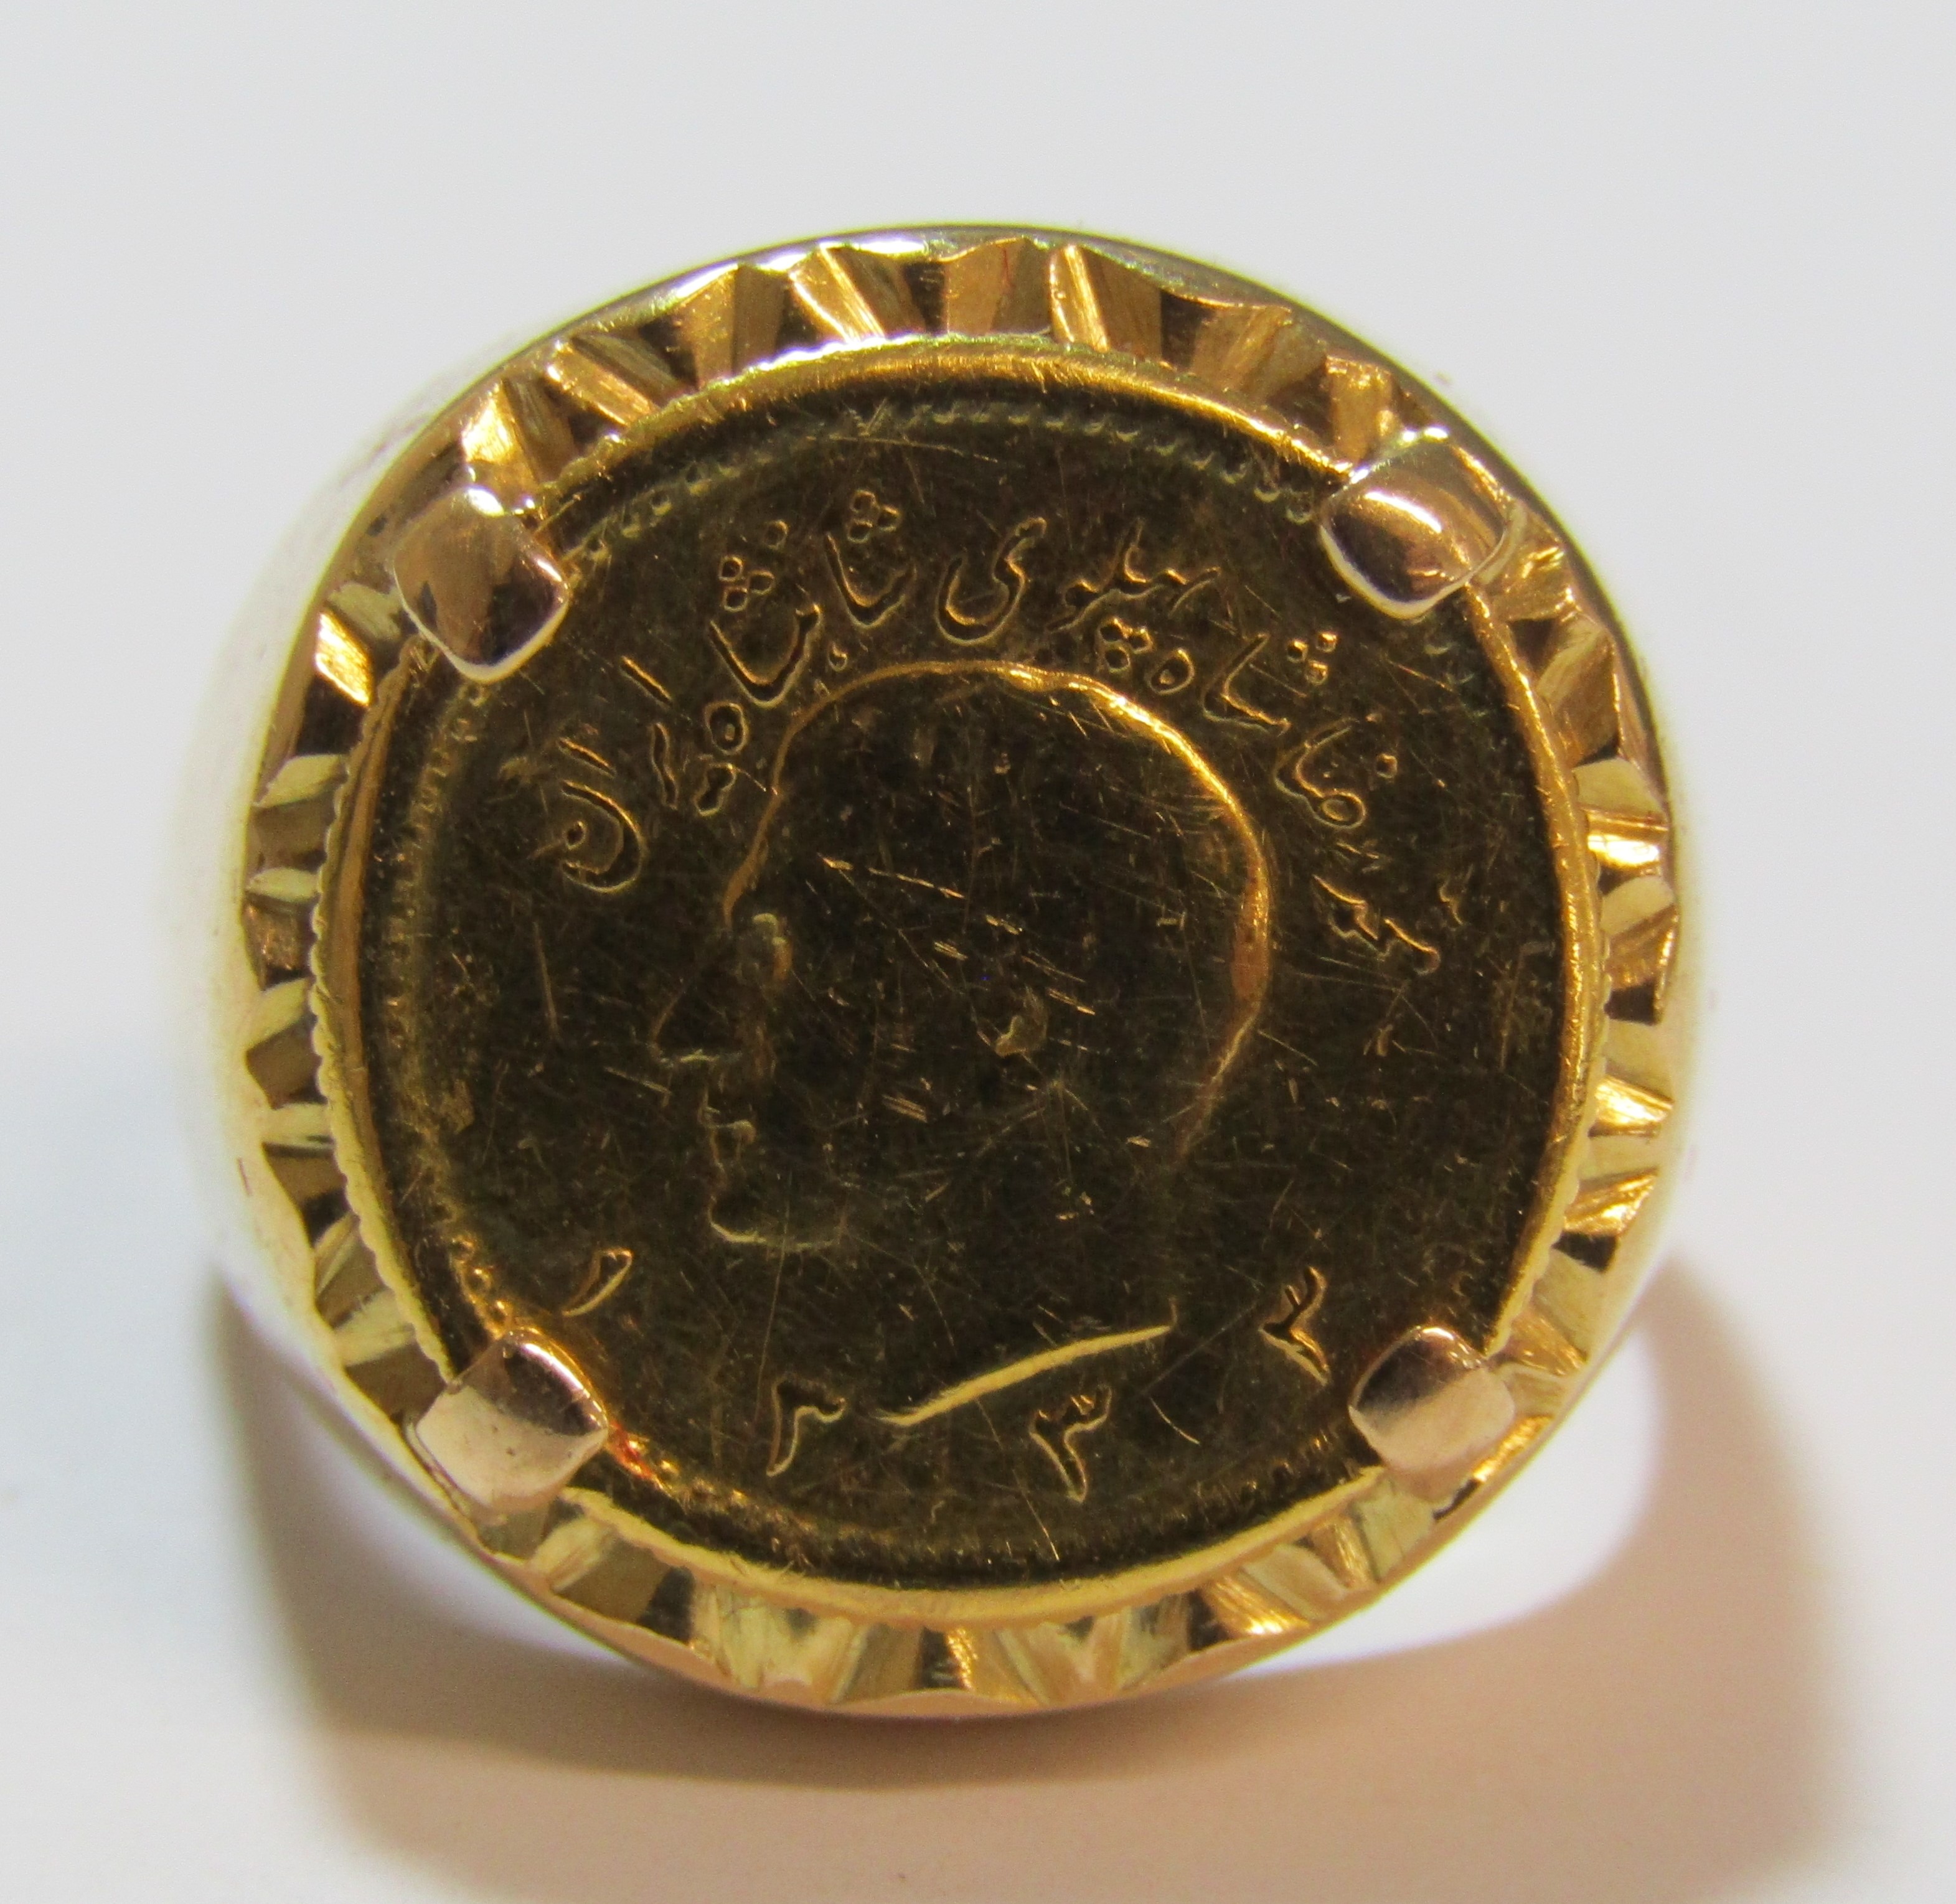 Tested as 9ct gold ring mounted with 22ct Phalavi Mohammad Reza Shah Iran gold quarter - ring size N - Image 5 of 6